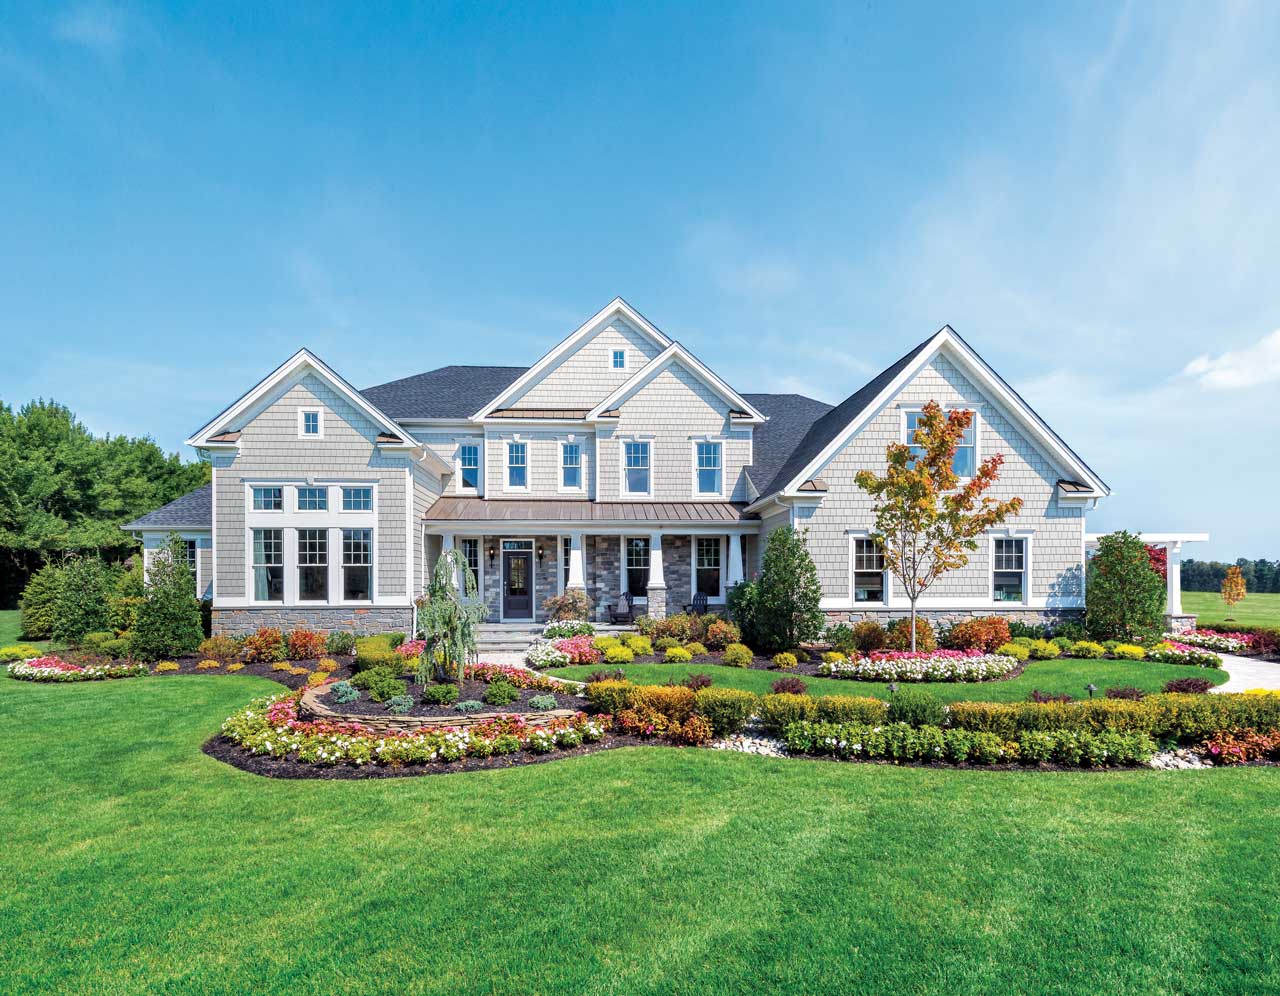 Toll Brothers Luxury Homes For Sale Orchard Ridge Bergen County